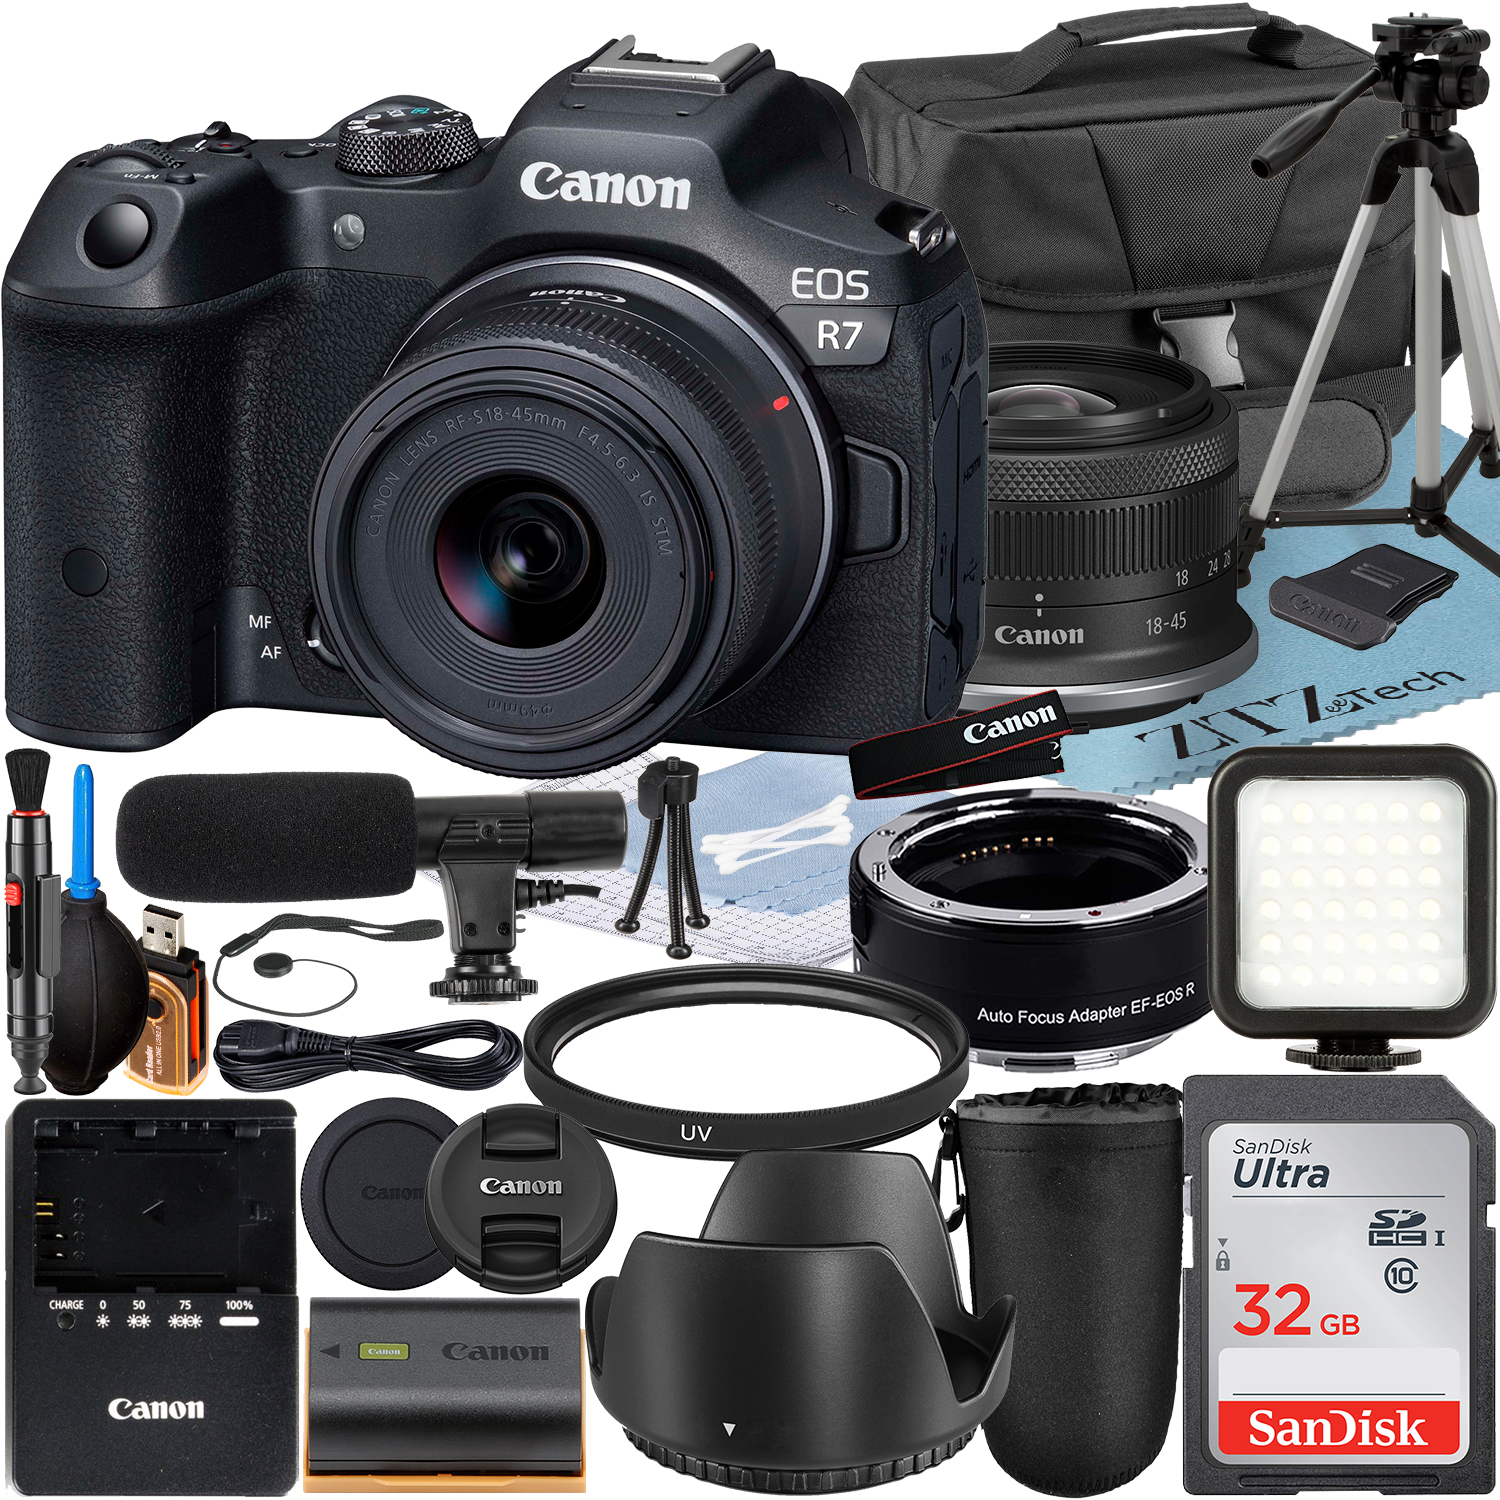 Canon EOS R7 Mirrorless Camera with RF-S 18-45mm Lens + Mount Adapter + SanDisk 32GB Memory Card + Case + LED Flash + ZeeTech Accessory Bundle